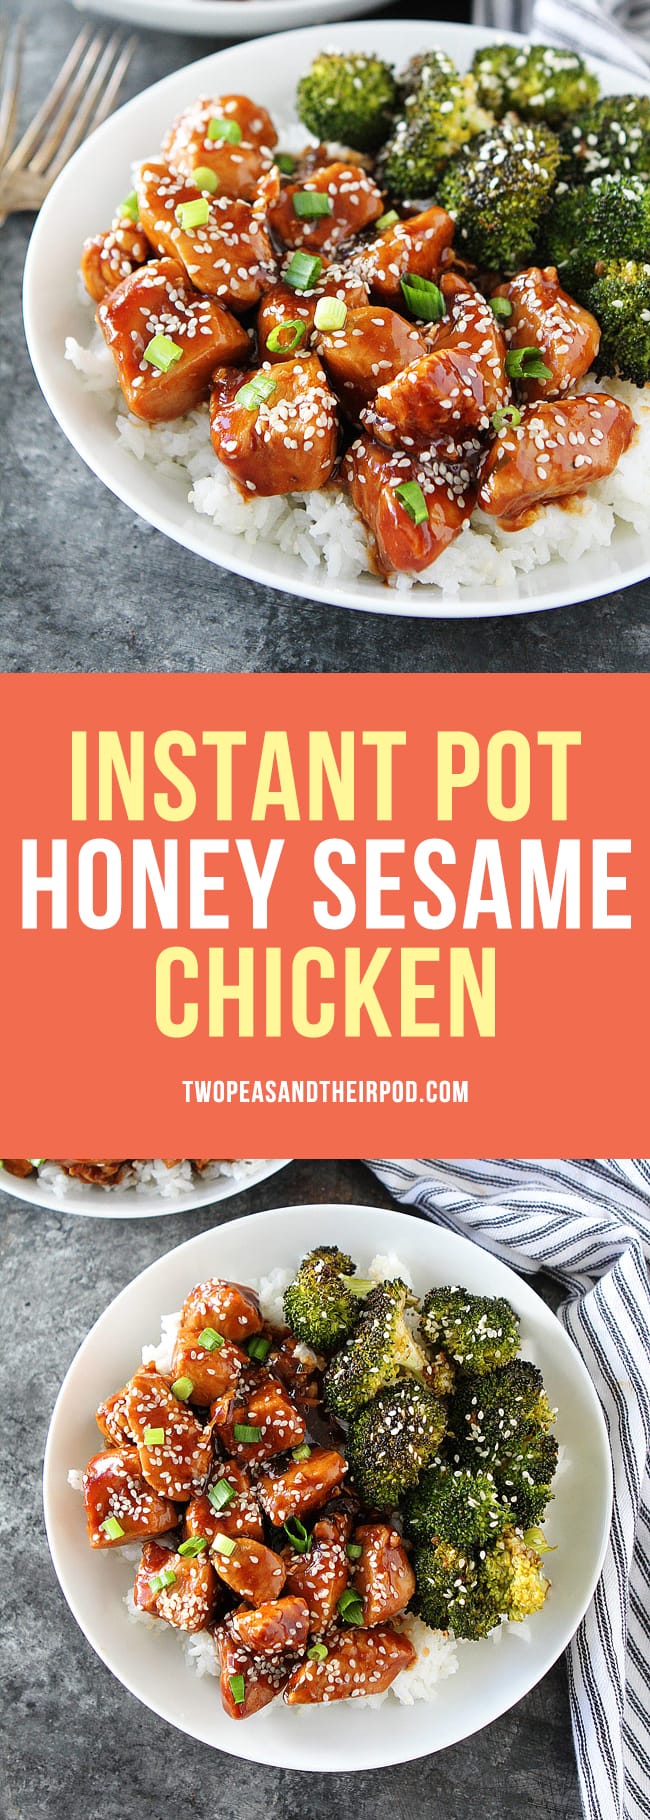 Honey Sesame Chicken made in the Instant Pot is a family favorite chicken dinner! It only takes 25 minutes to make and is MUCH better than takeout! #chicken #chickenrecipe #dinner #chickendinner #instantpot #easyrecipes 